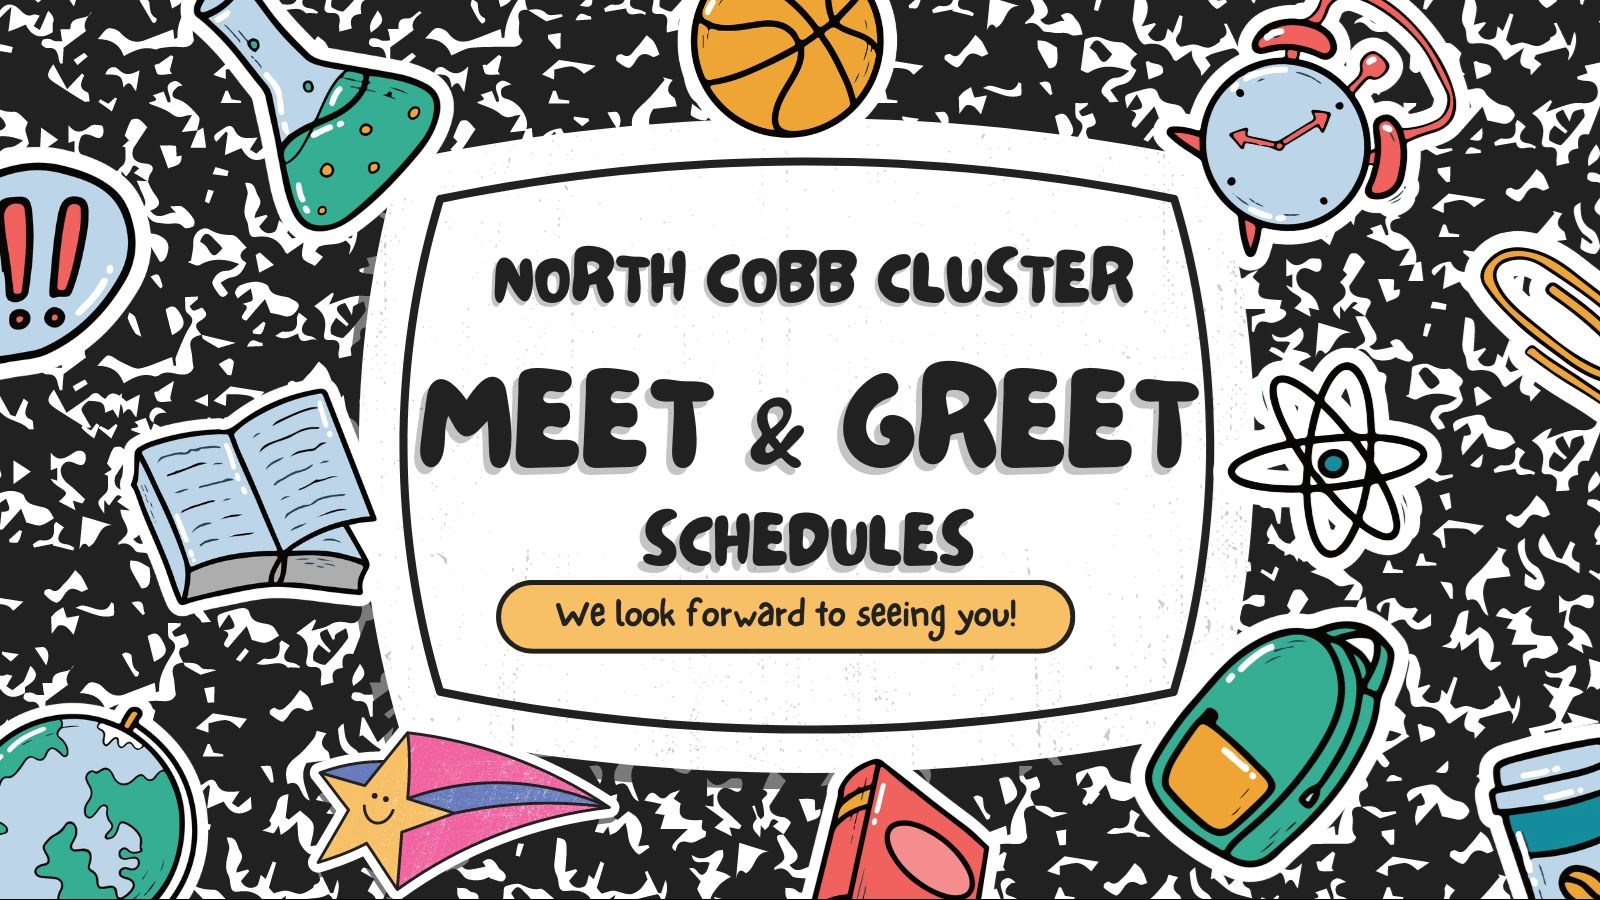 North Cobb Cluster Meet and Greet Schedules